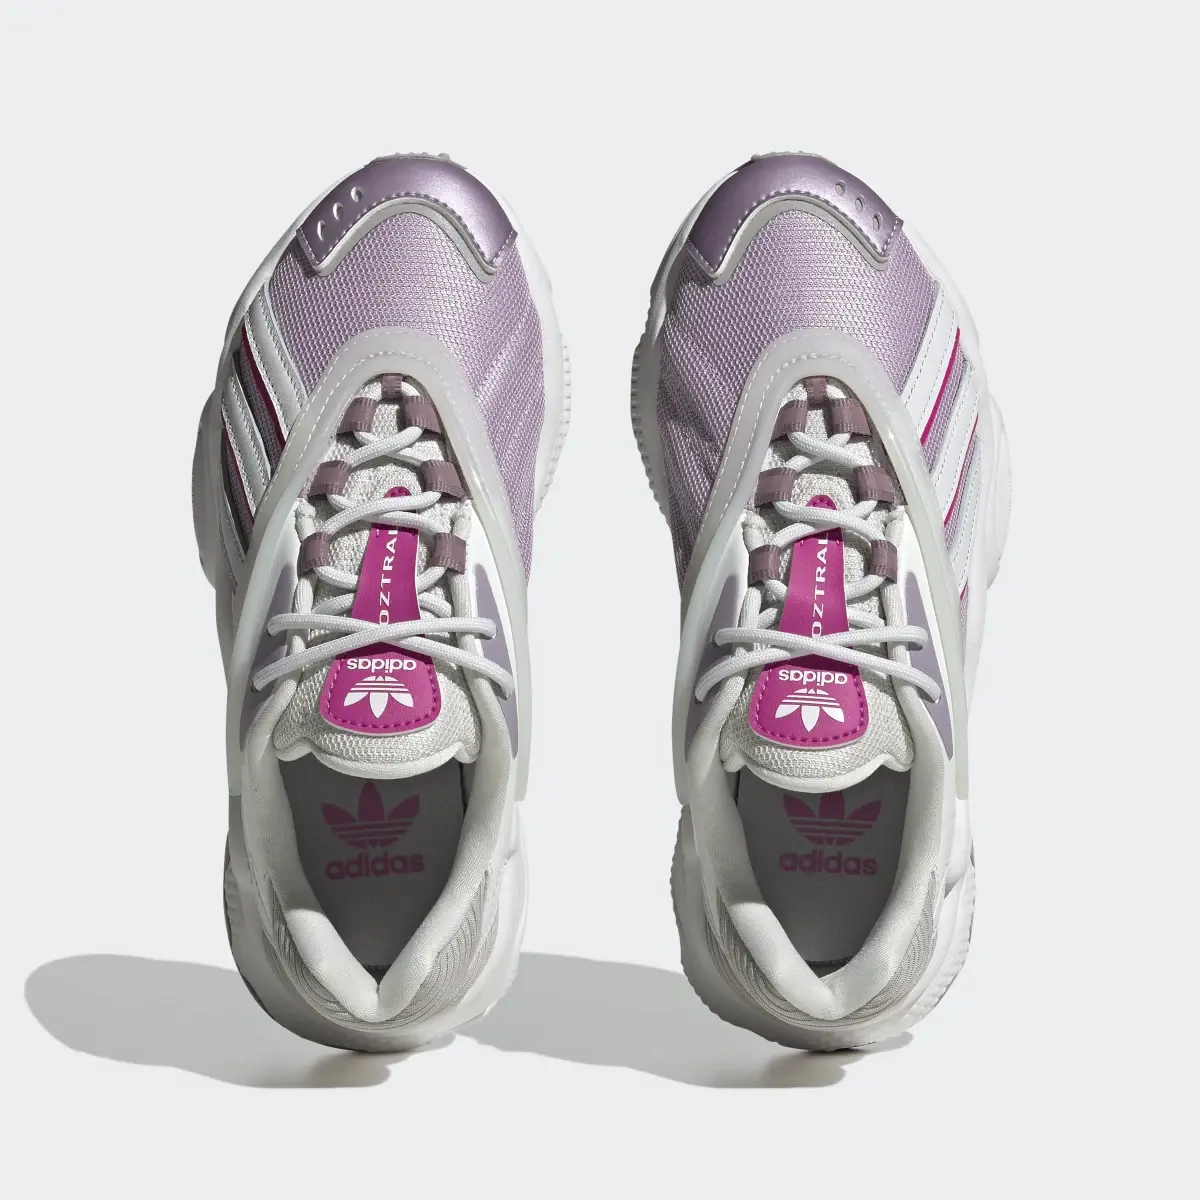 Adidas OZTRAL Shoes. 3